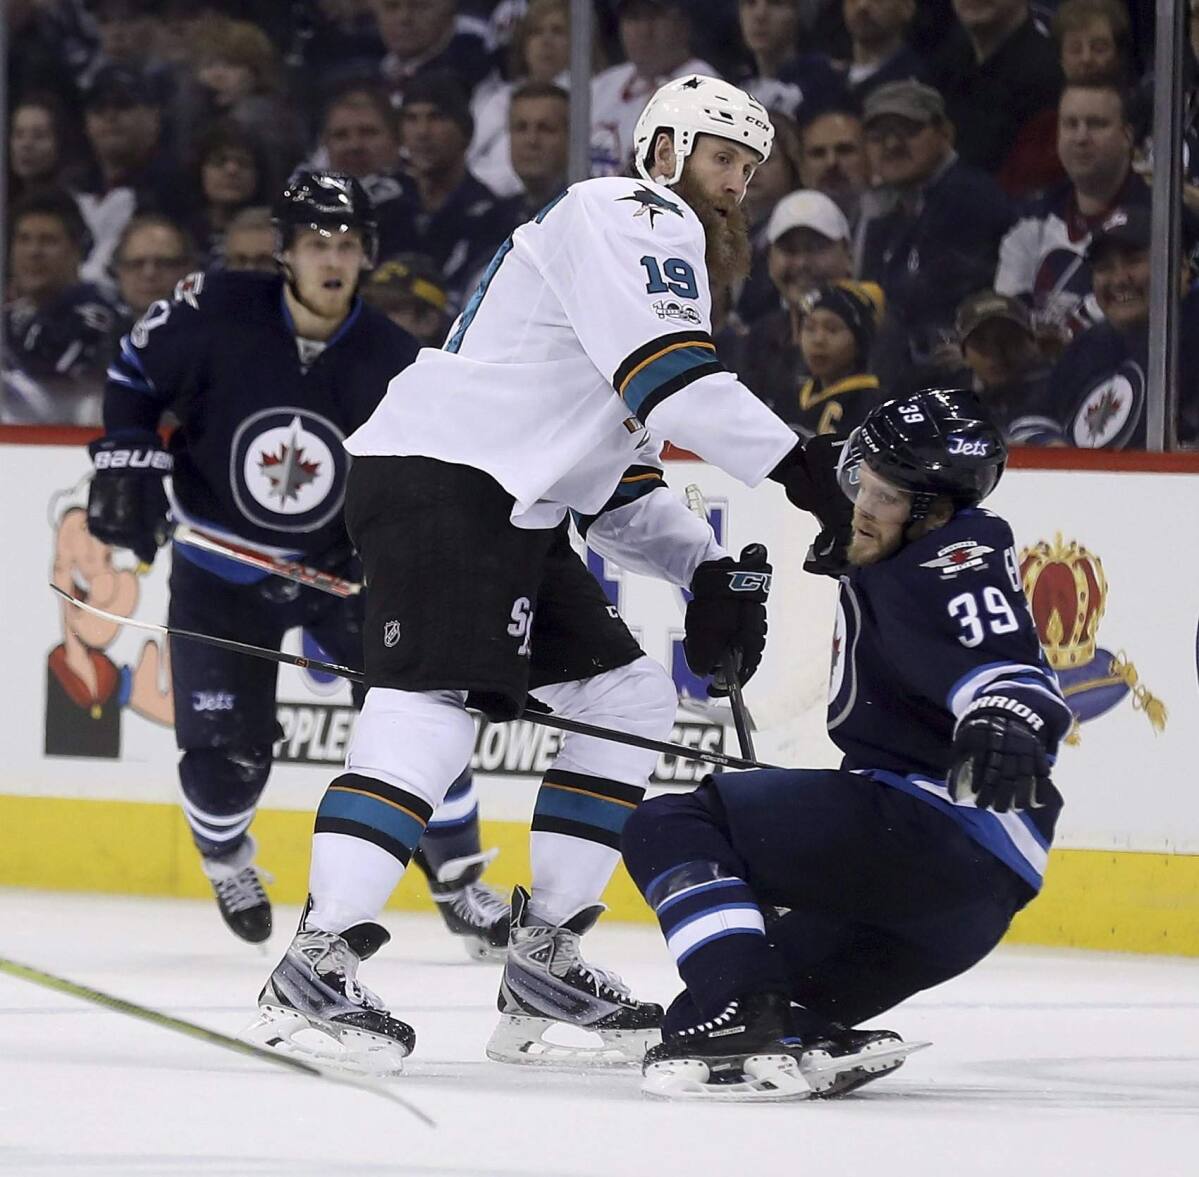 Sharks' Marc-Edouard Vlasic to play 1,000th NHL game